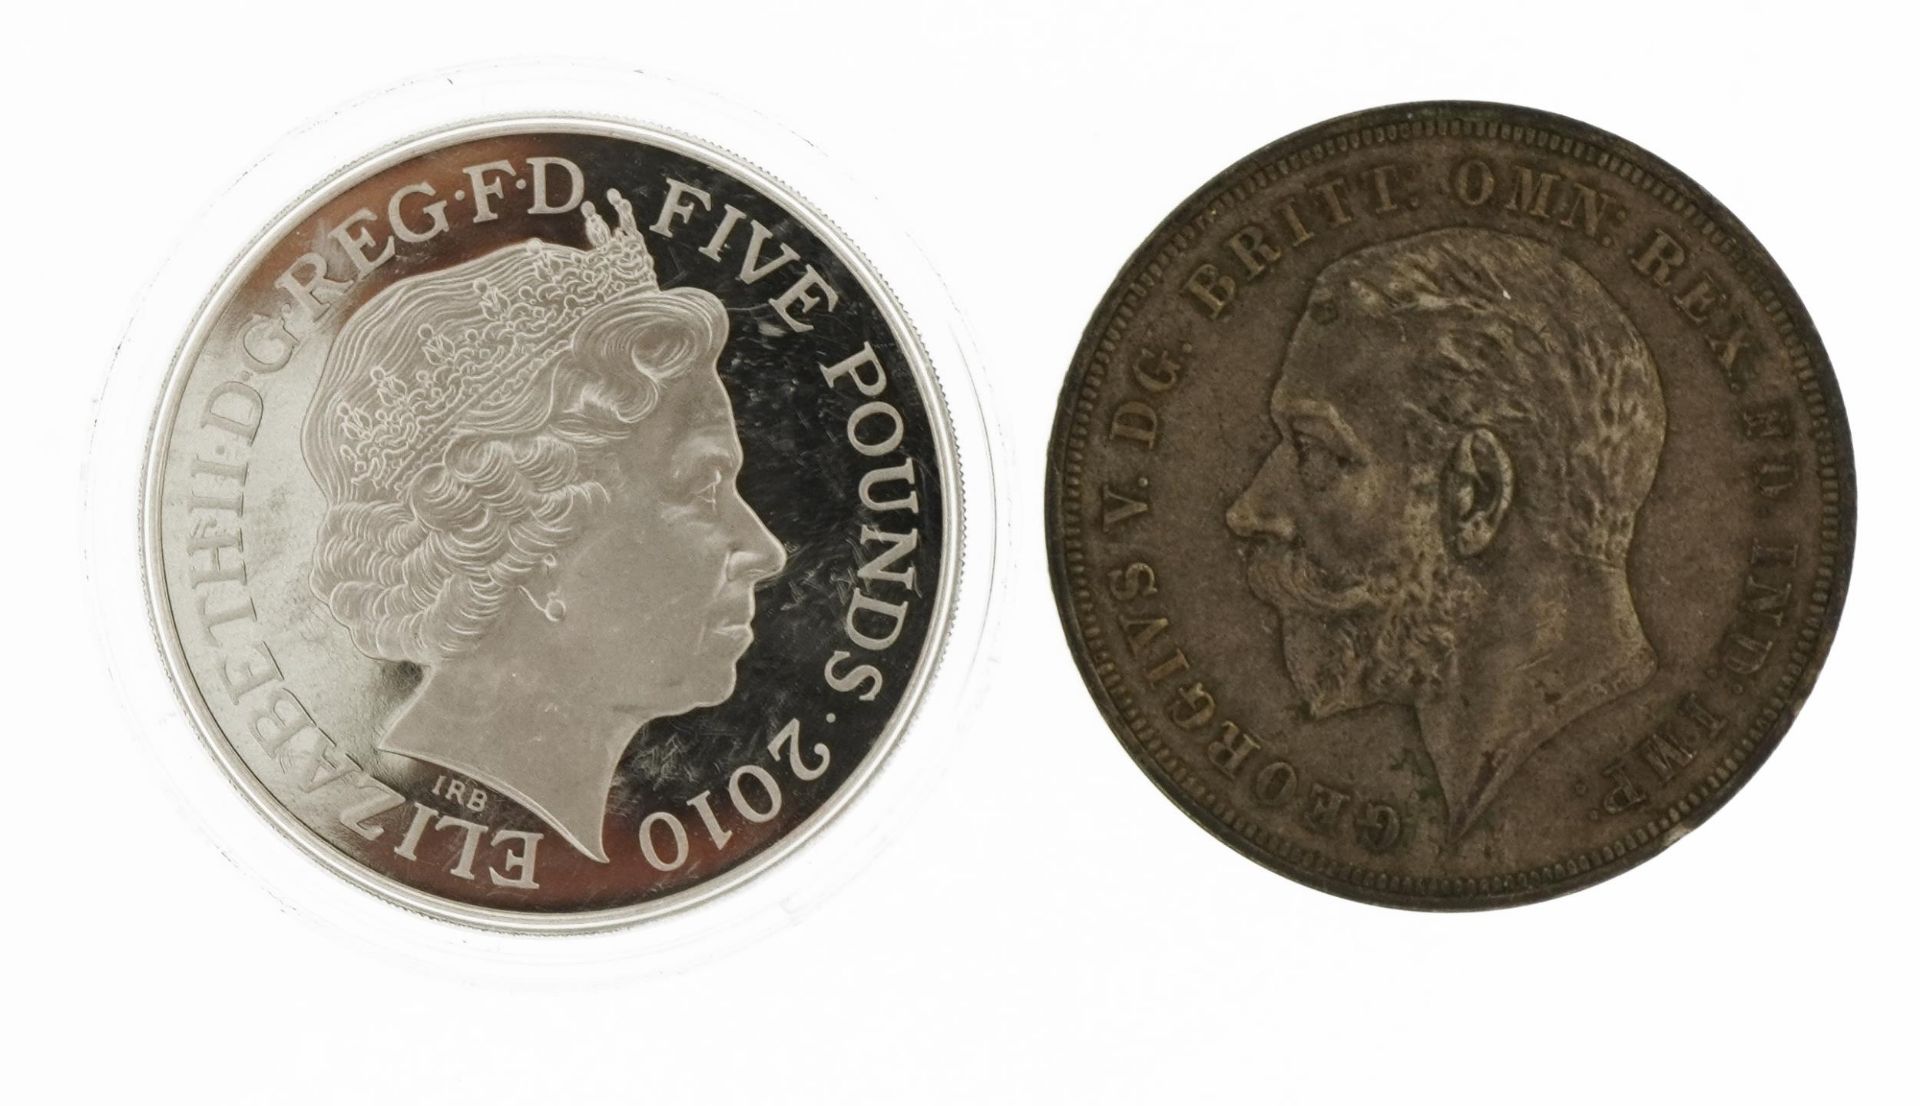 Elizabeth II 2010 Churchill silver five pound coin and a George V 1935 Rocking Horse crown : For - Image 2 of 2